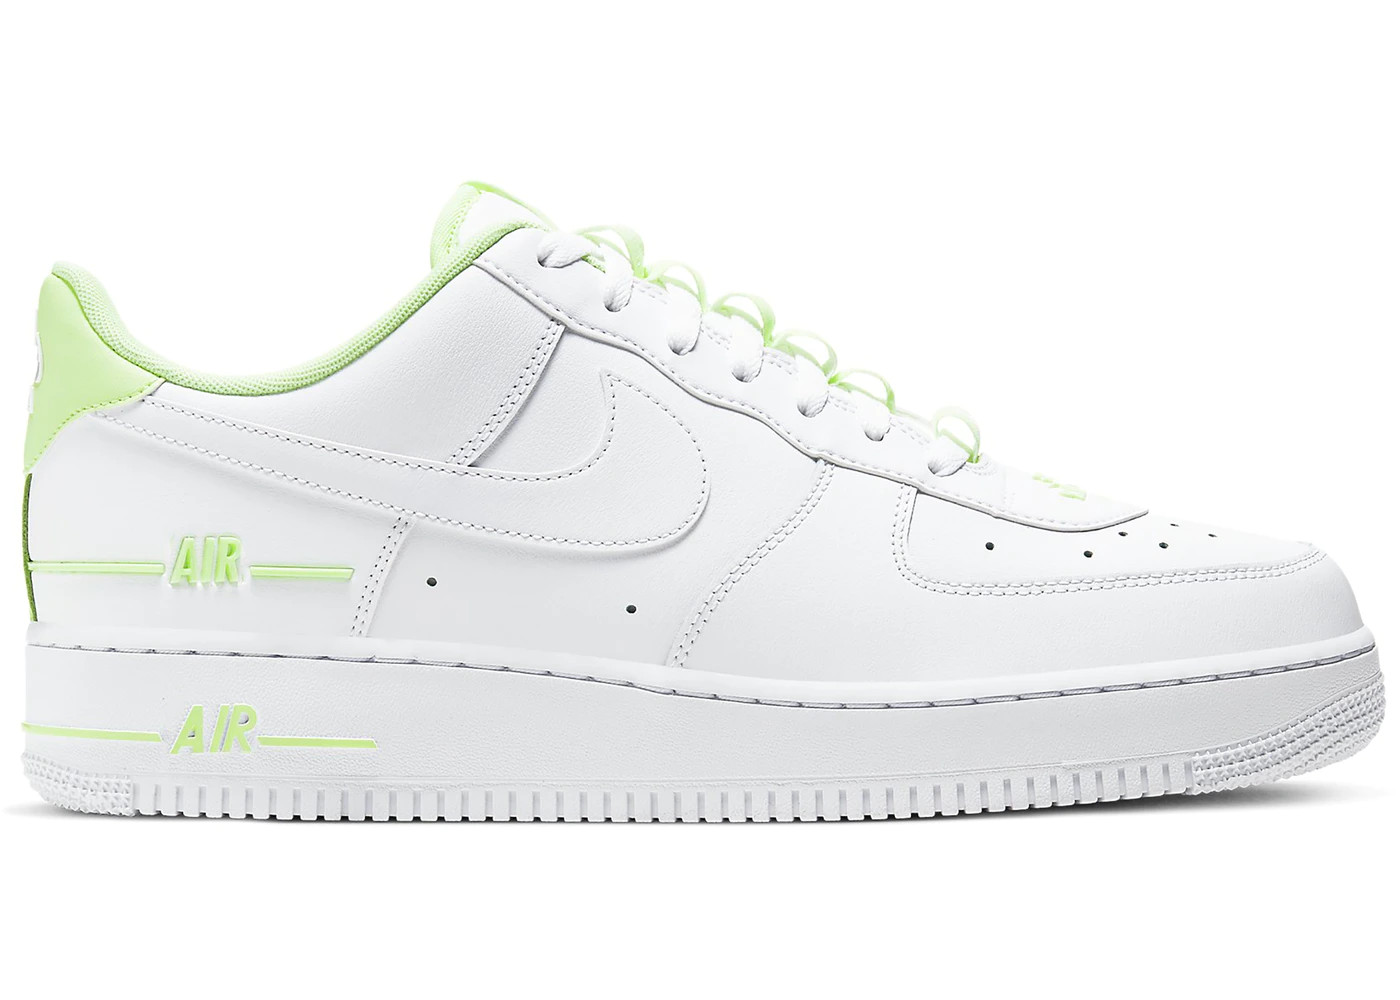 Nike Air Force 1'07 LV8 Double Air Pack Volt CJ1379 - nike shoe gary white - MultiscaleconsultingShops - 101